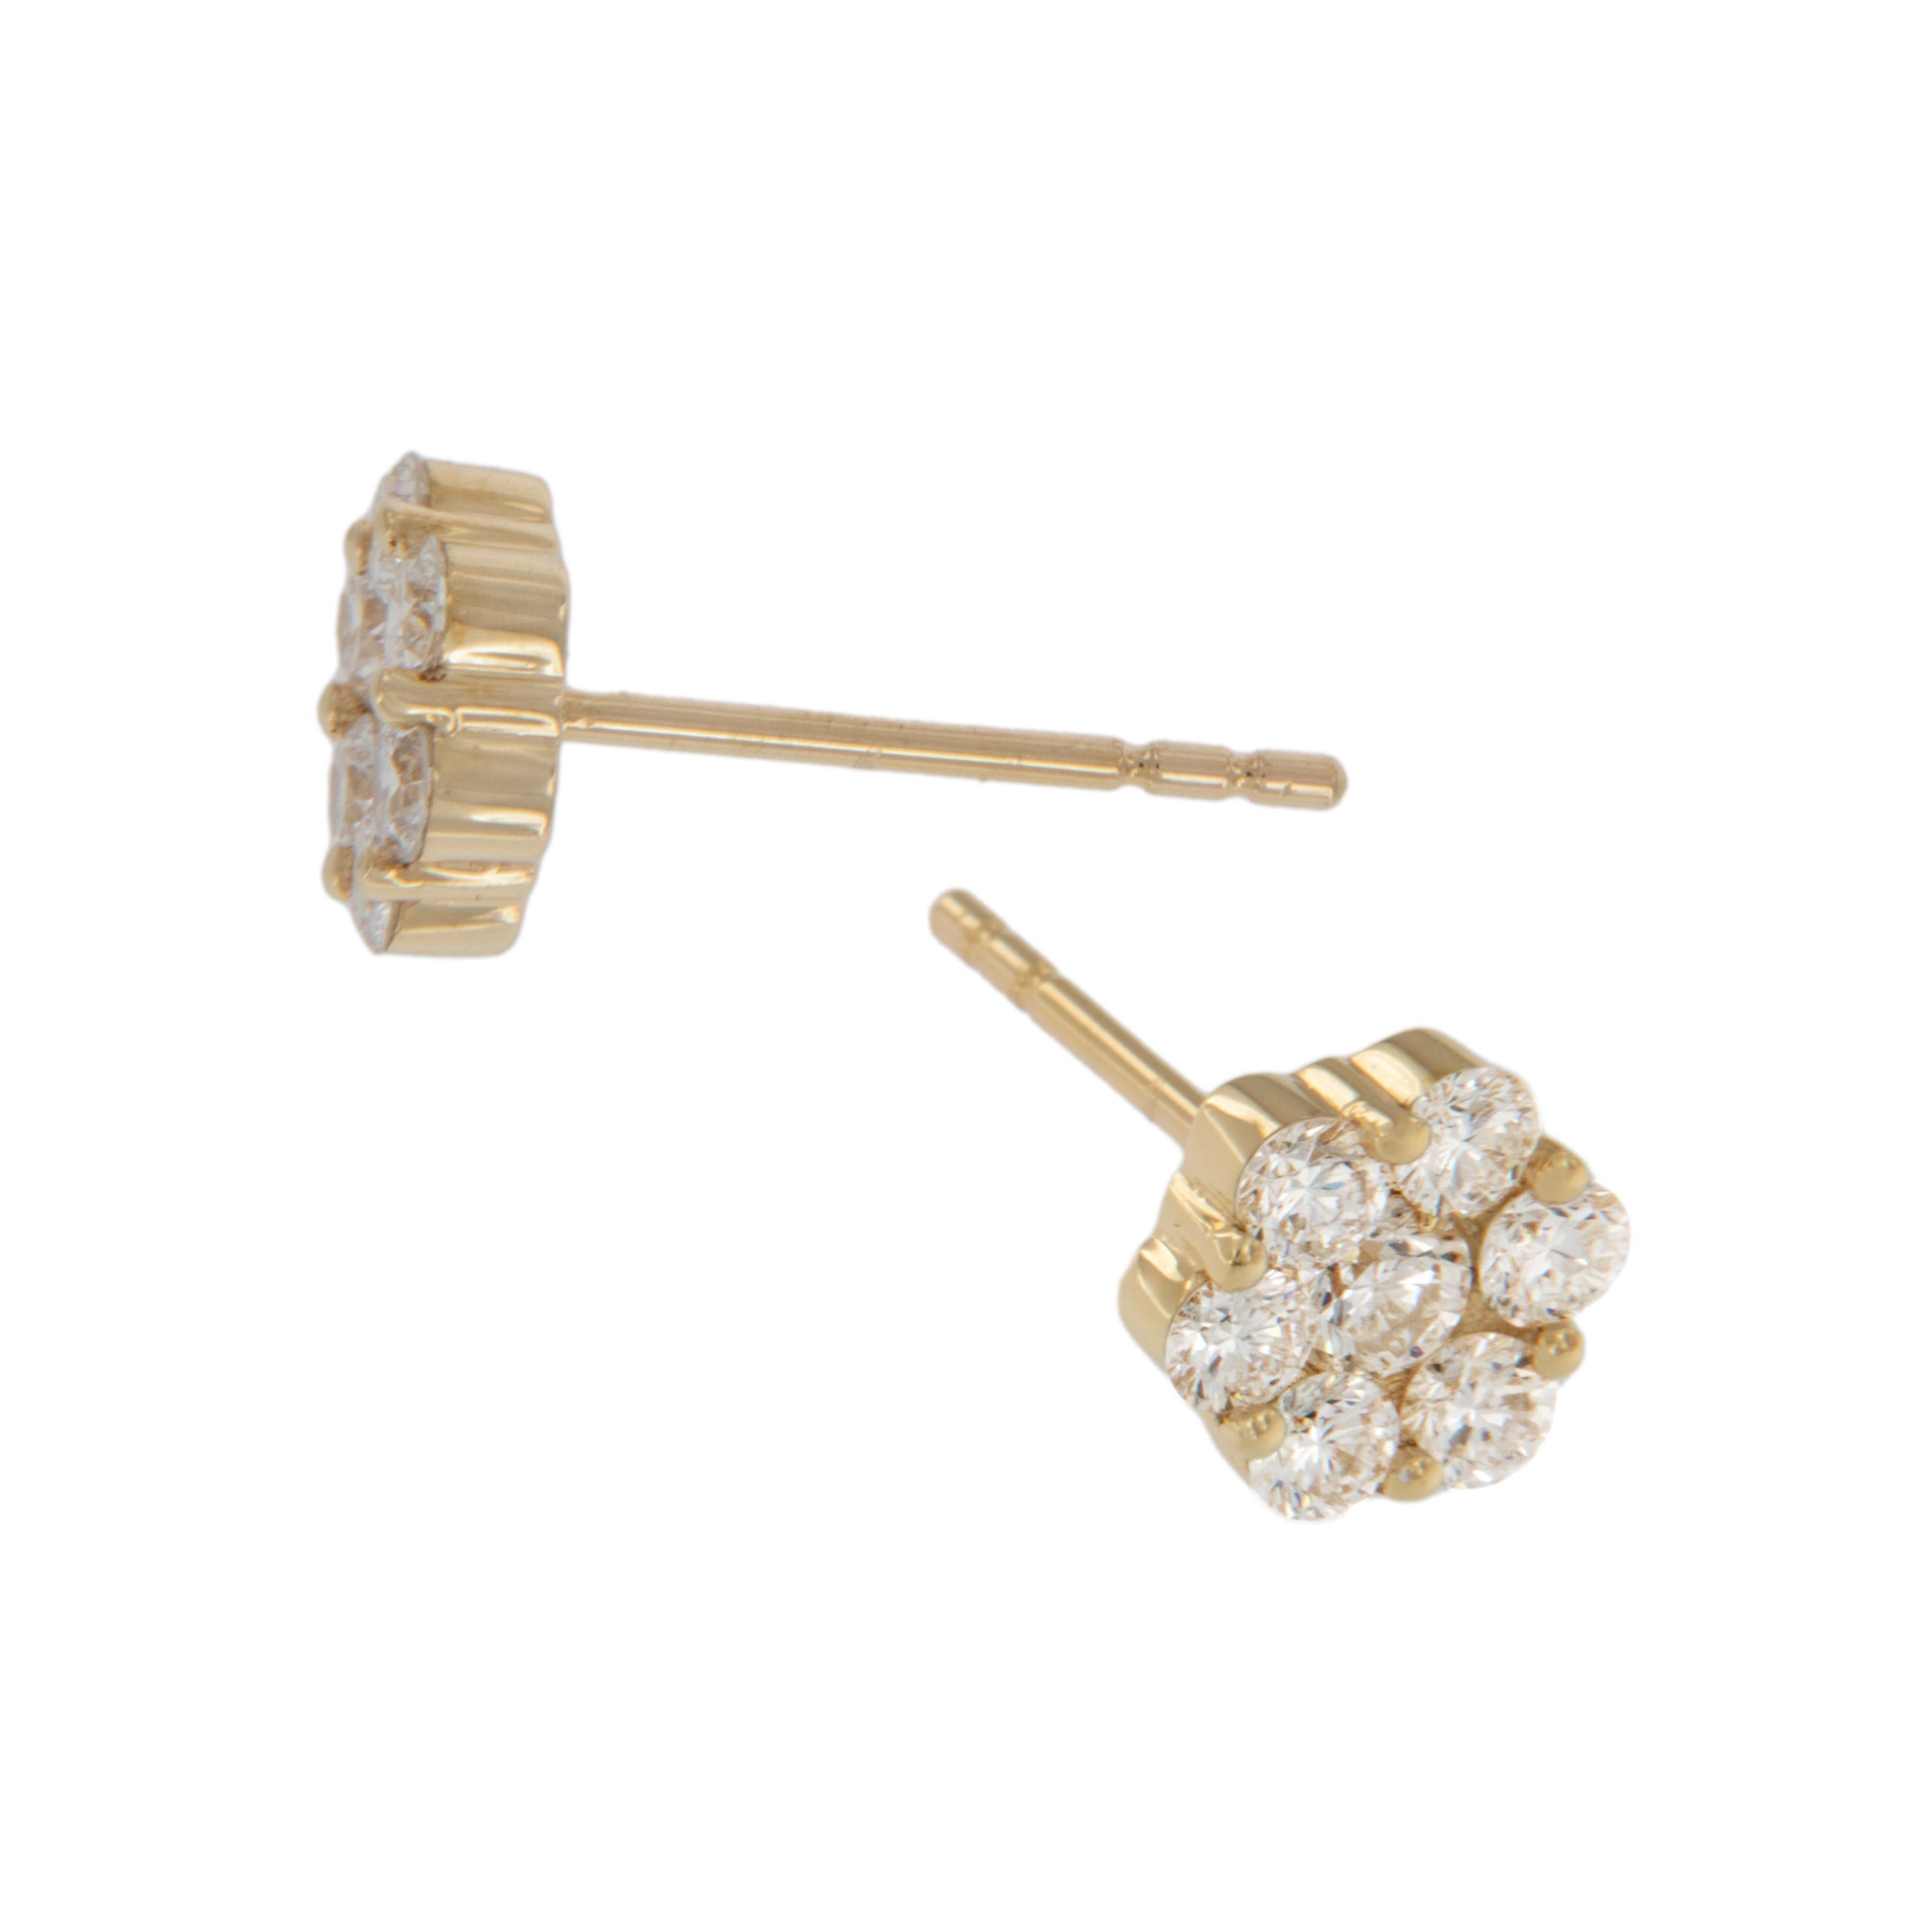 You can't go wrong with these fabulous cluster stud earrings! Made from fine 18 karat yellow gold & set with 0.75 Cttw of VS clarity & F-G color diamonds having posts & friction backs for security of wear. These classic earrings have a substantial